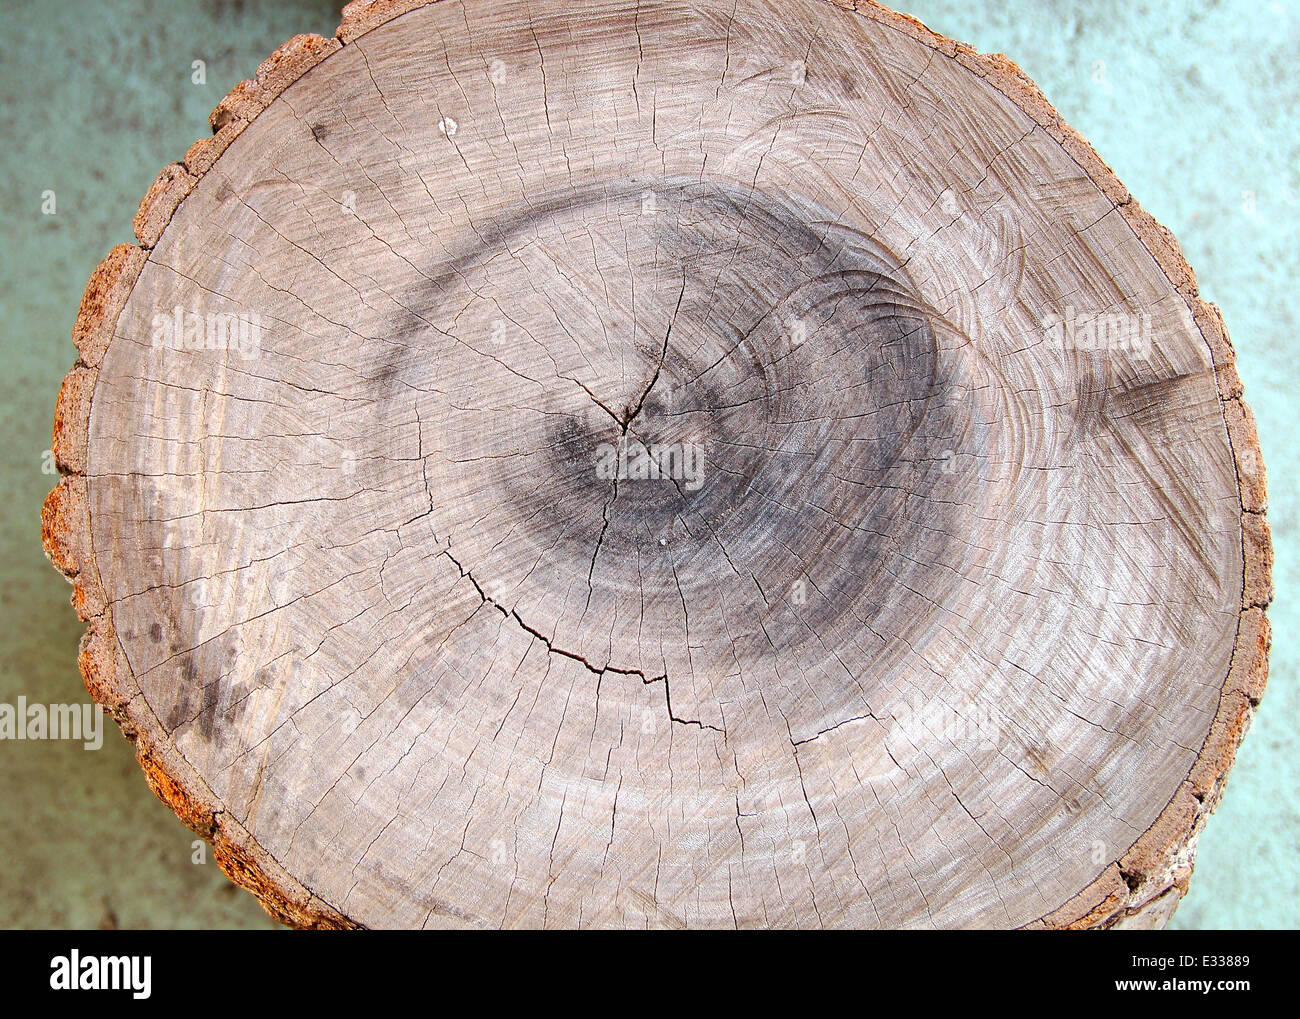 Experts reveal secret about tree rings